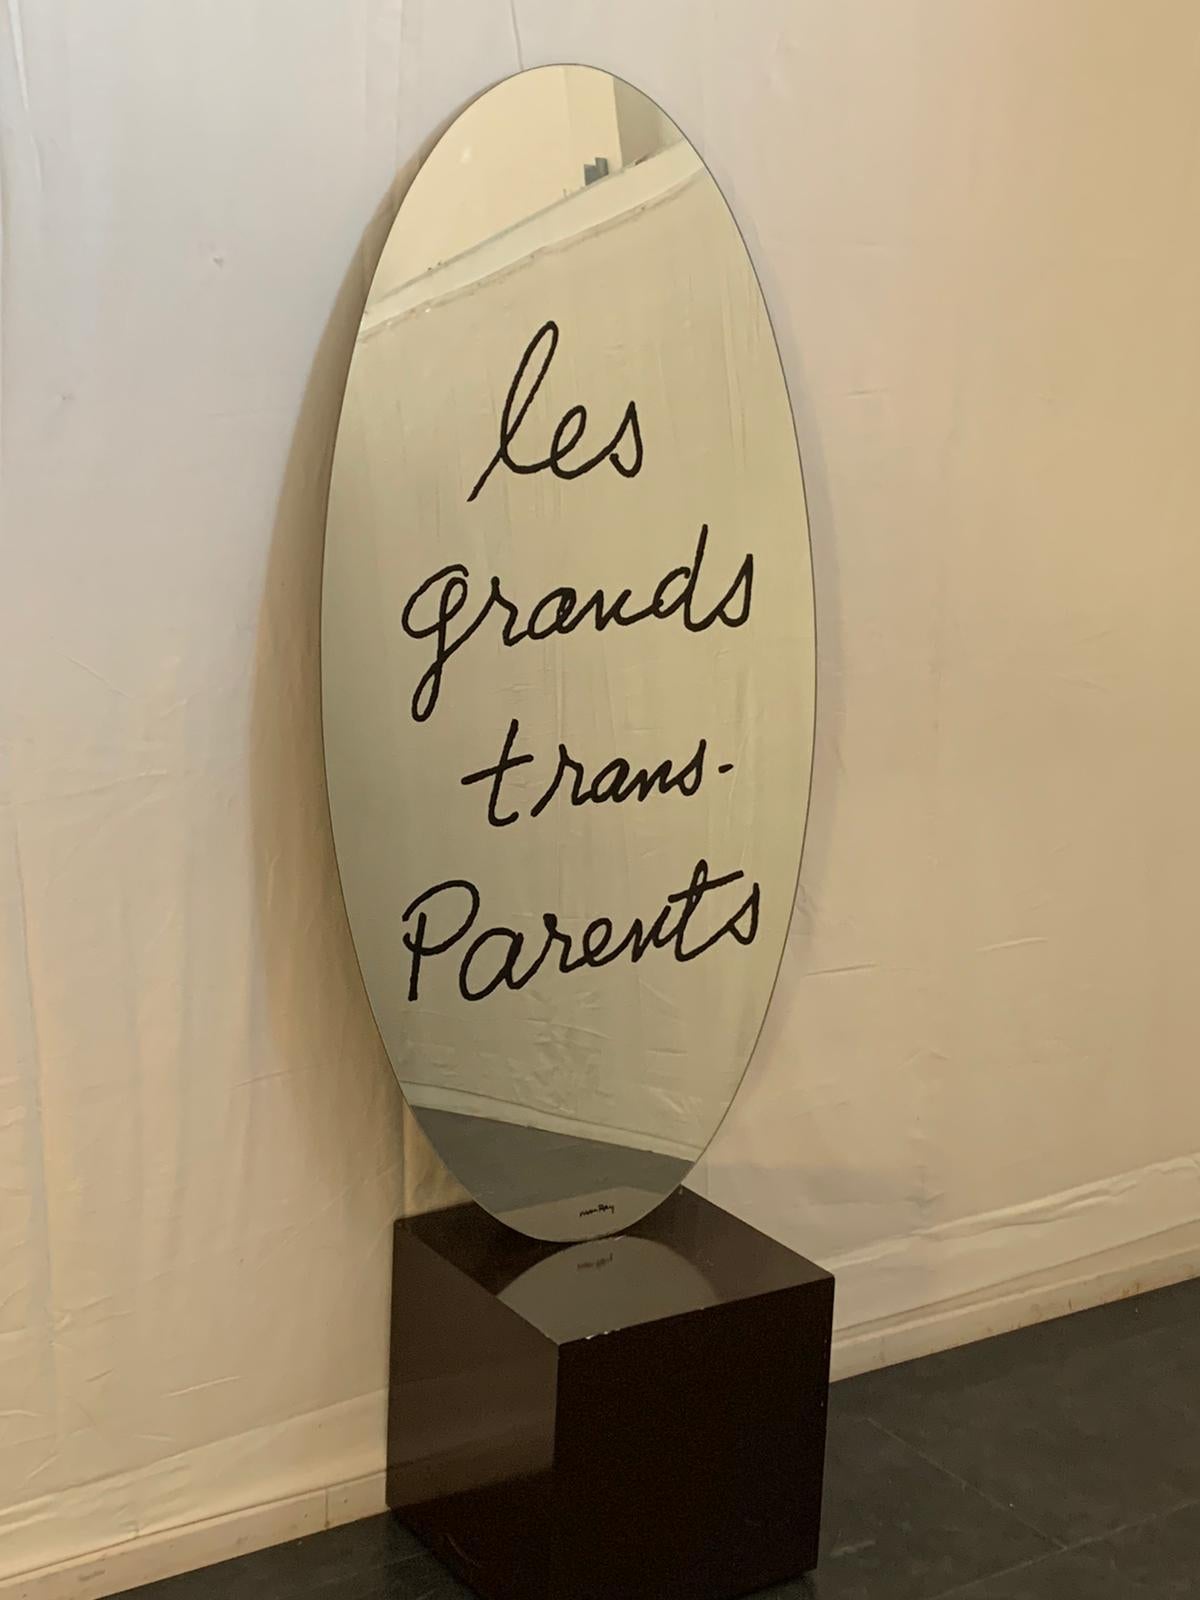 Ultramobile les grands trans-parents collection designed by Man Ray Design year 1938 Production year 1971-1972. Manufacturer Simon International Material Screen-printed elliptical mirror with rigid polyurethane support as in origin.
Packaging with